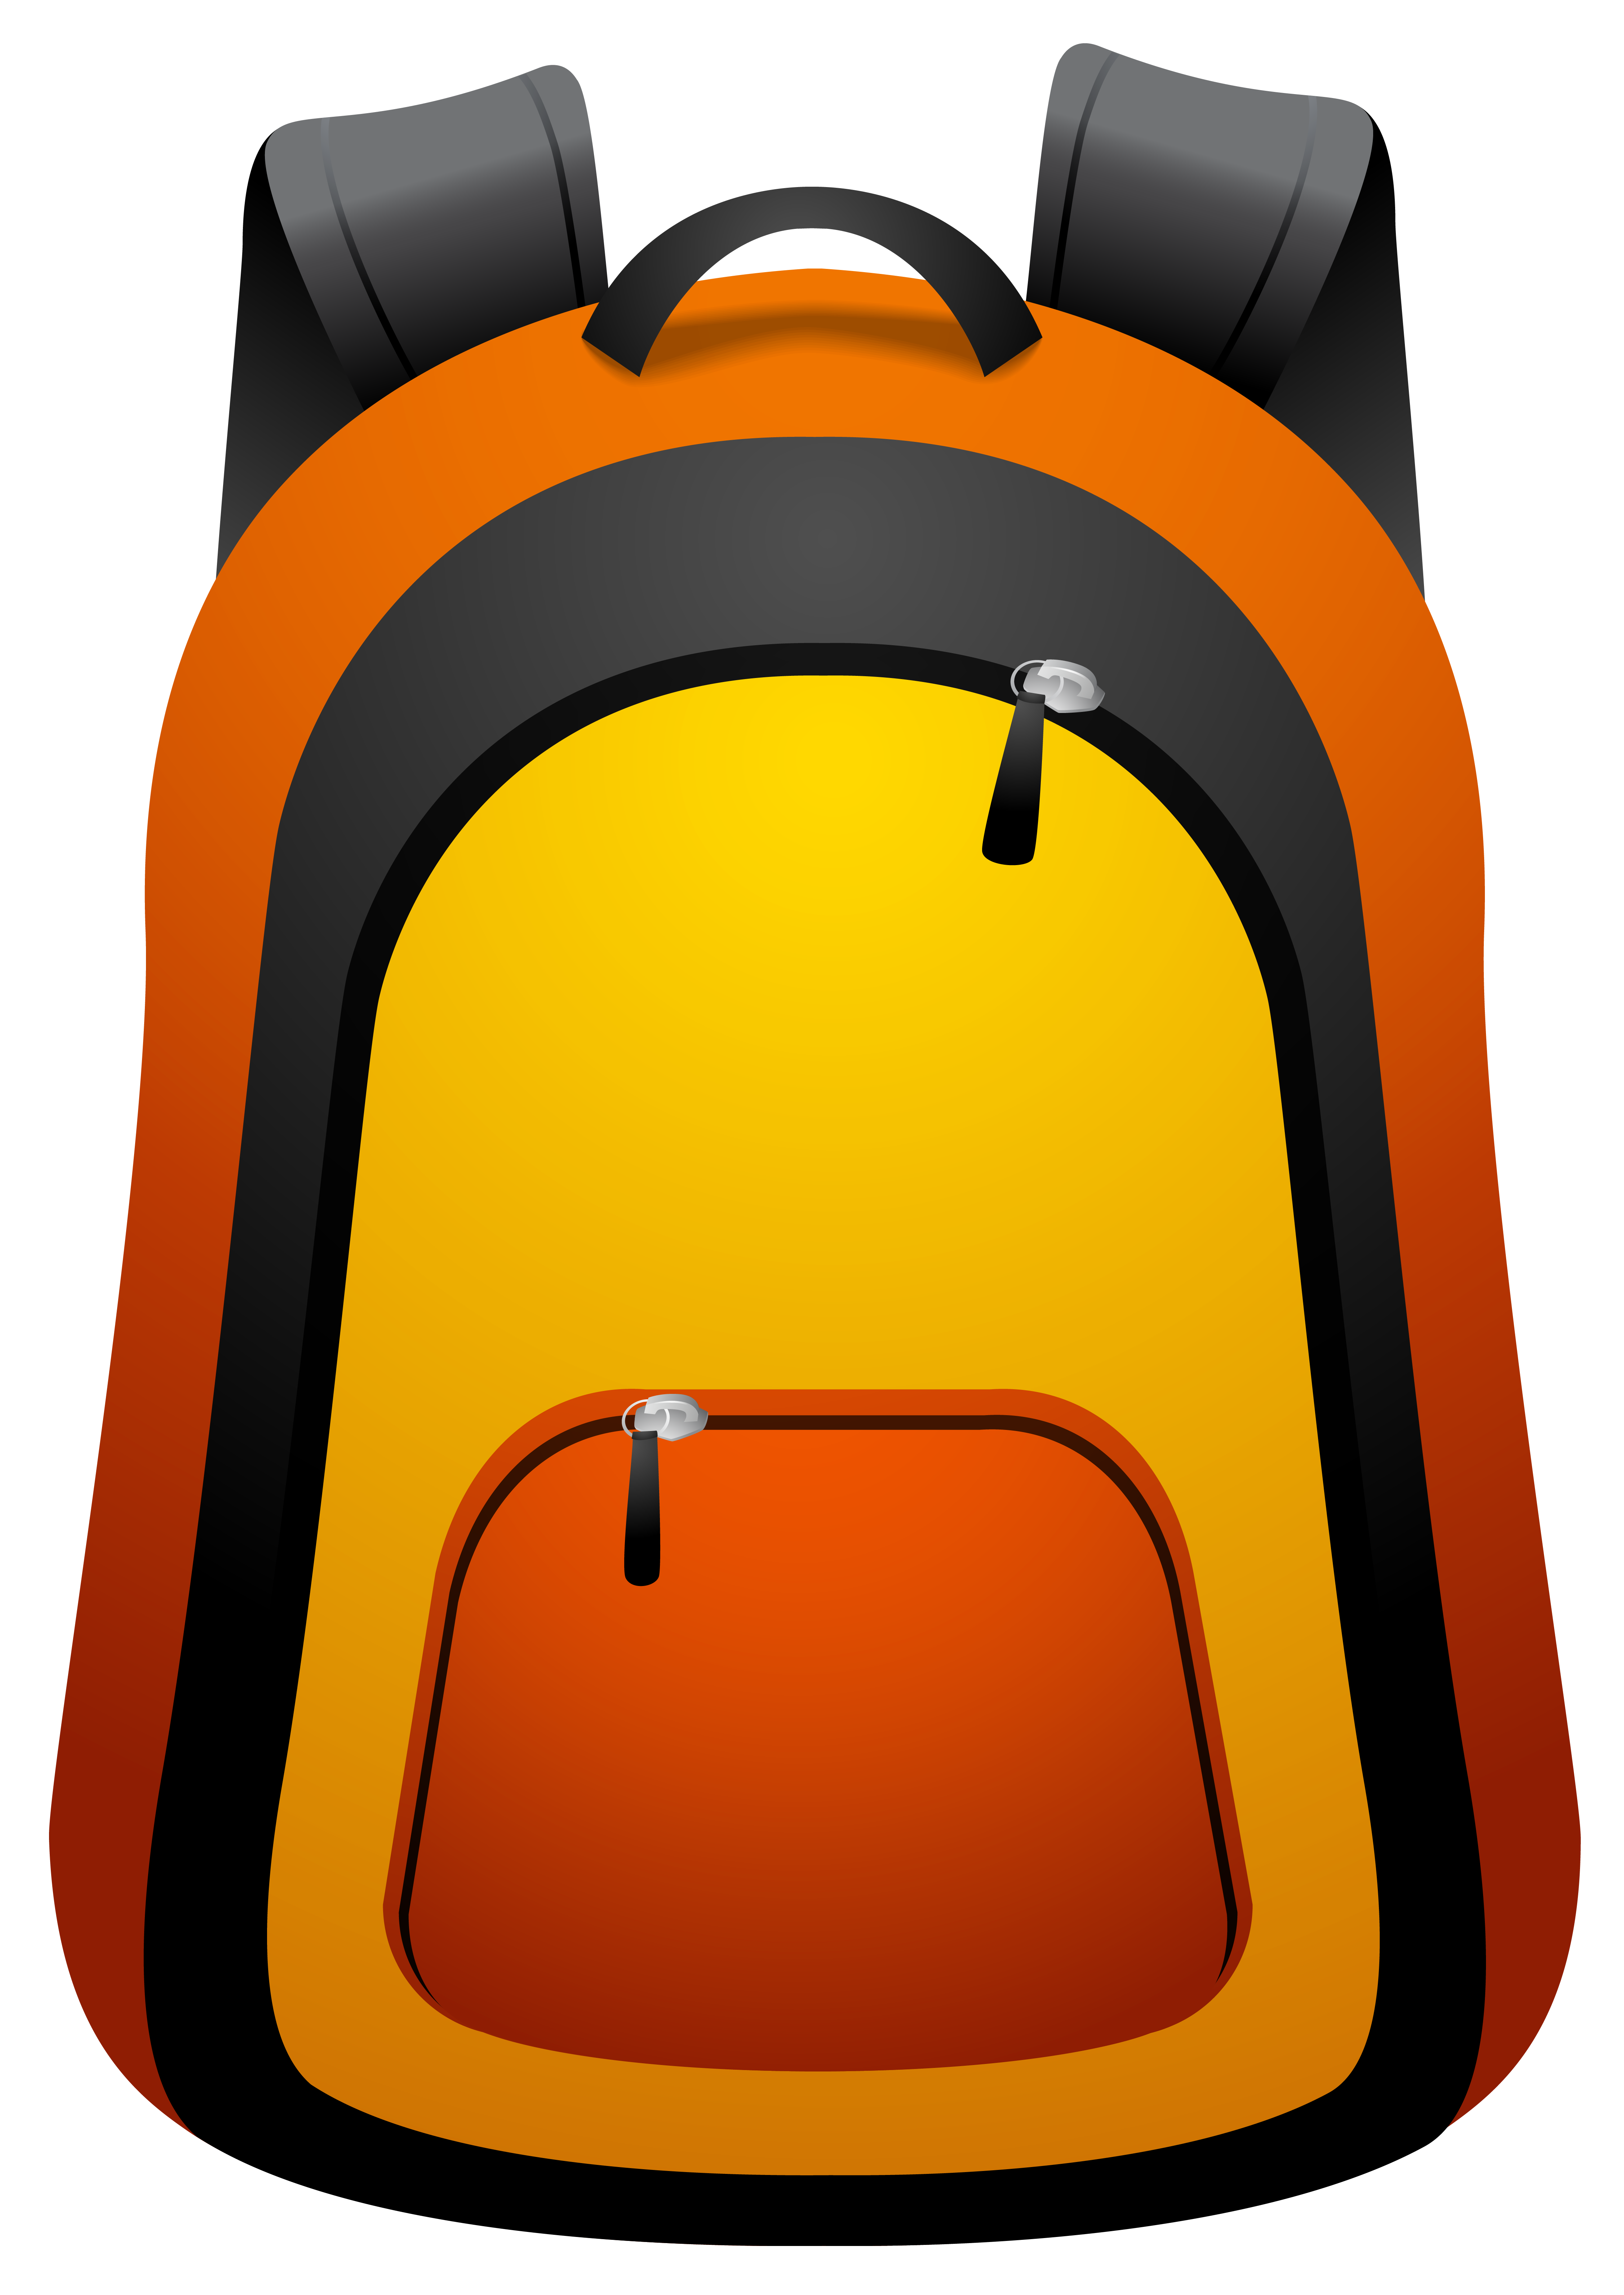 back pack clipart